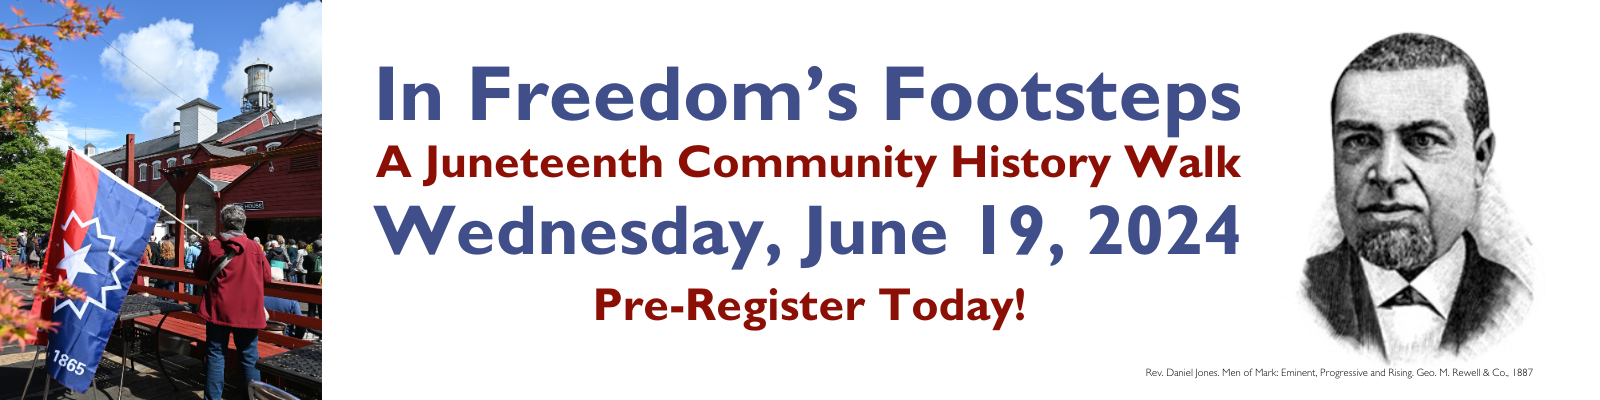 In Freedom's Footsteps: A Juneteenth Community History